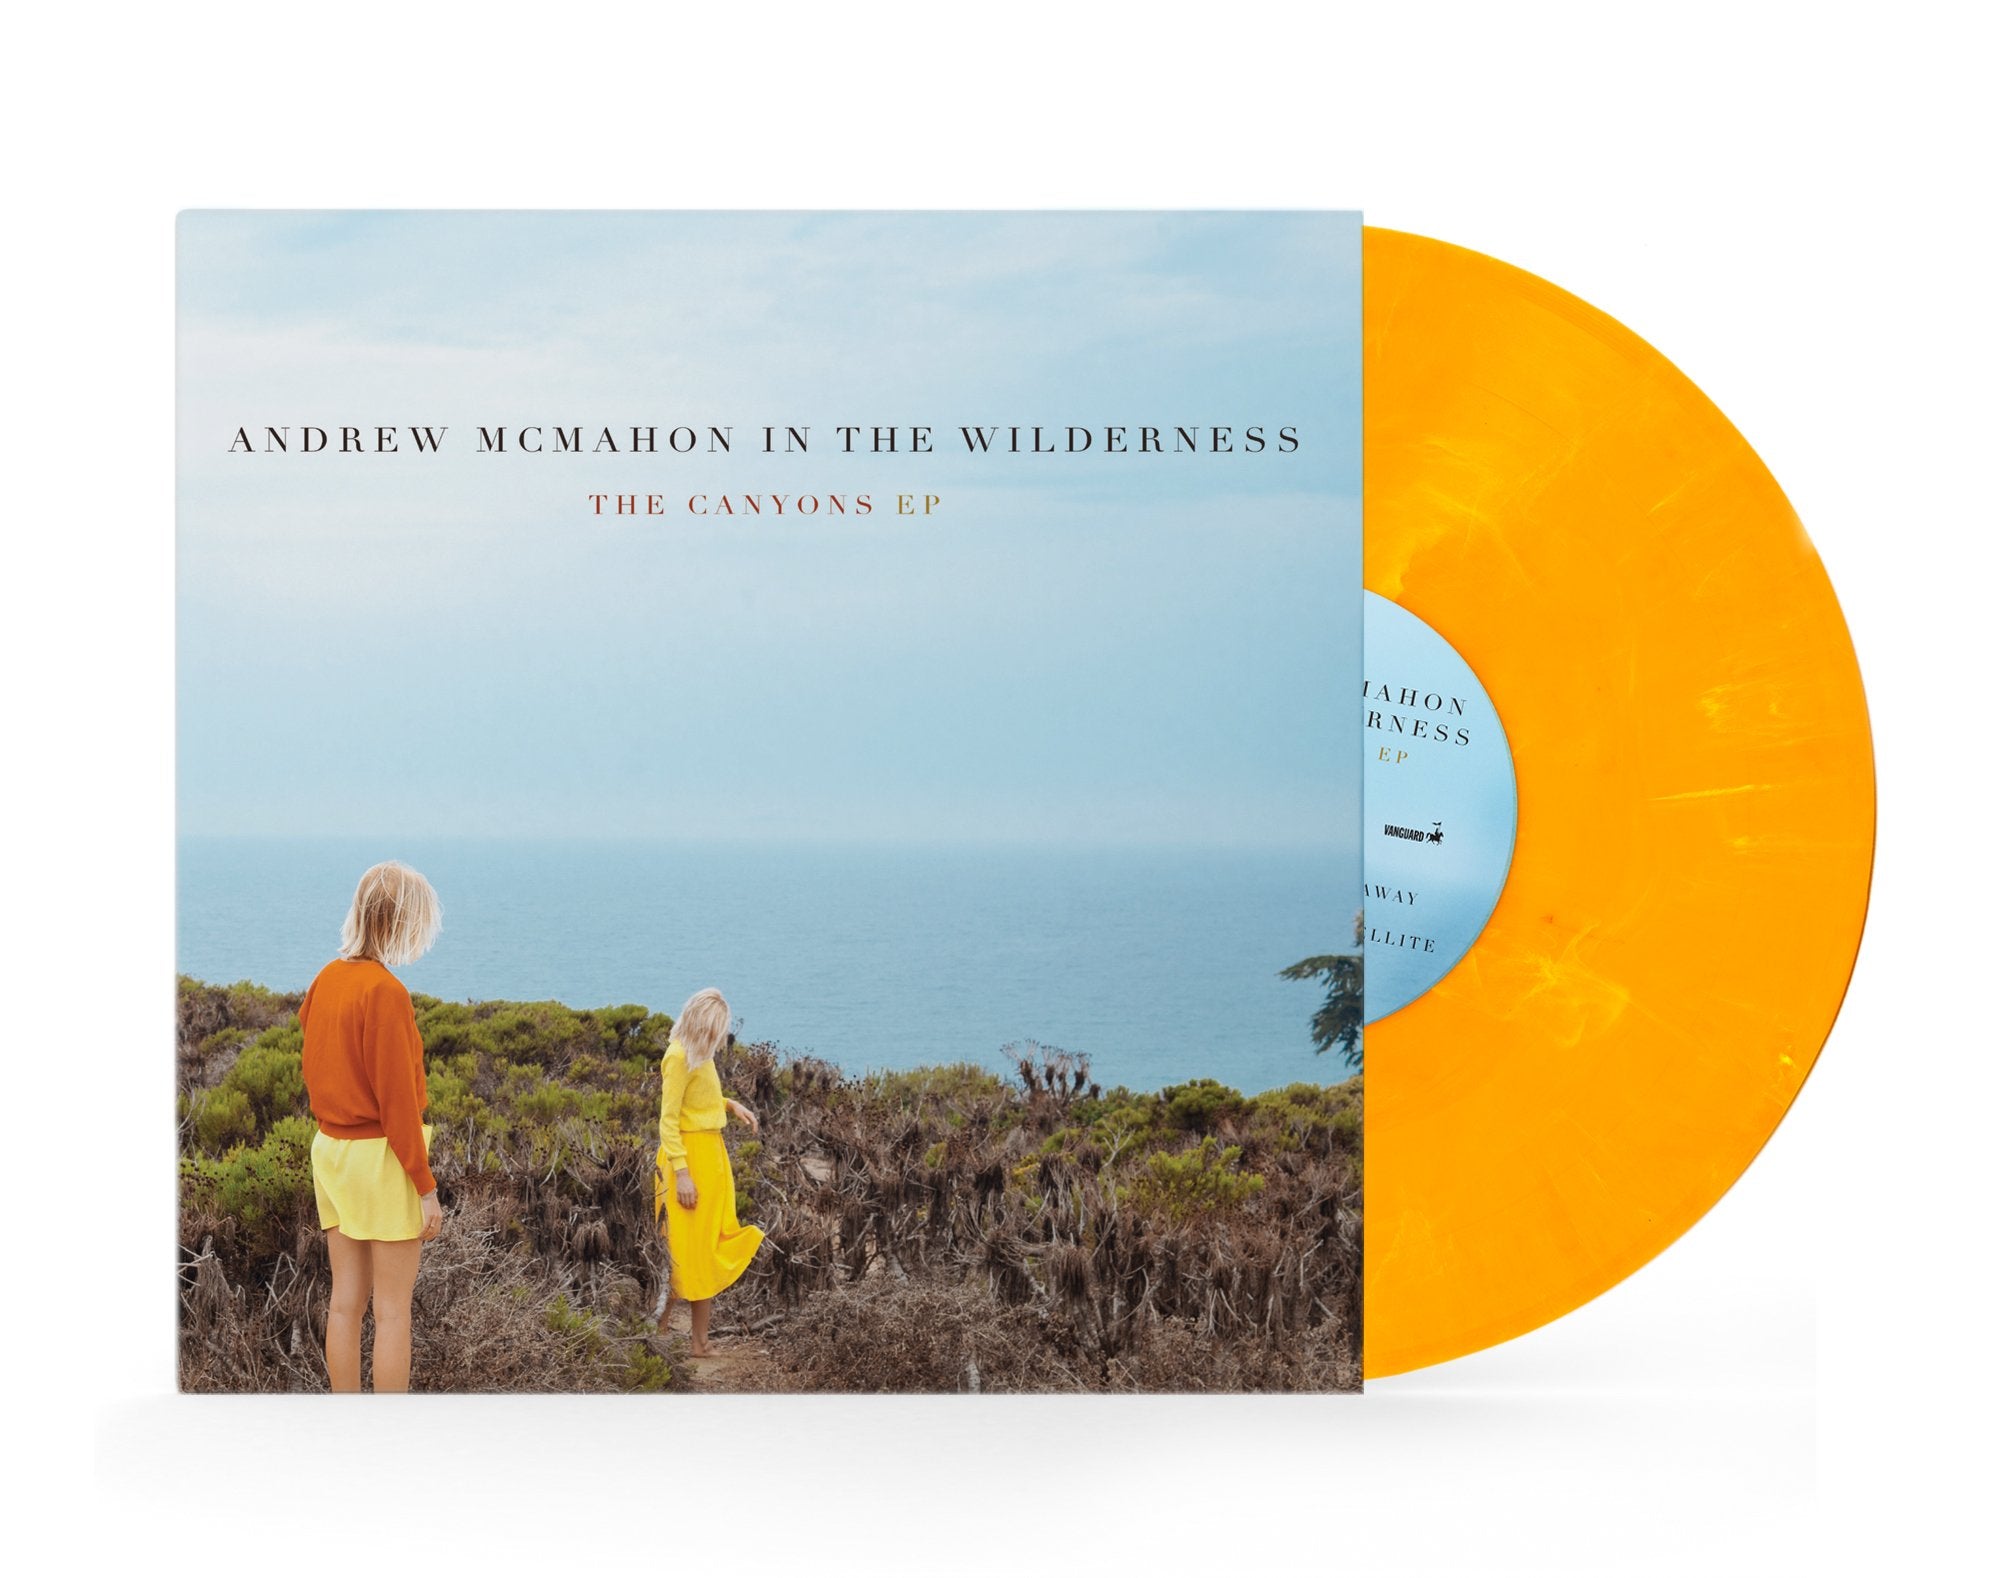 Limited Edition Record Store Day Vinyl